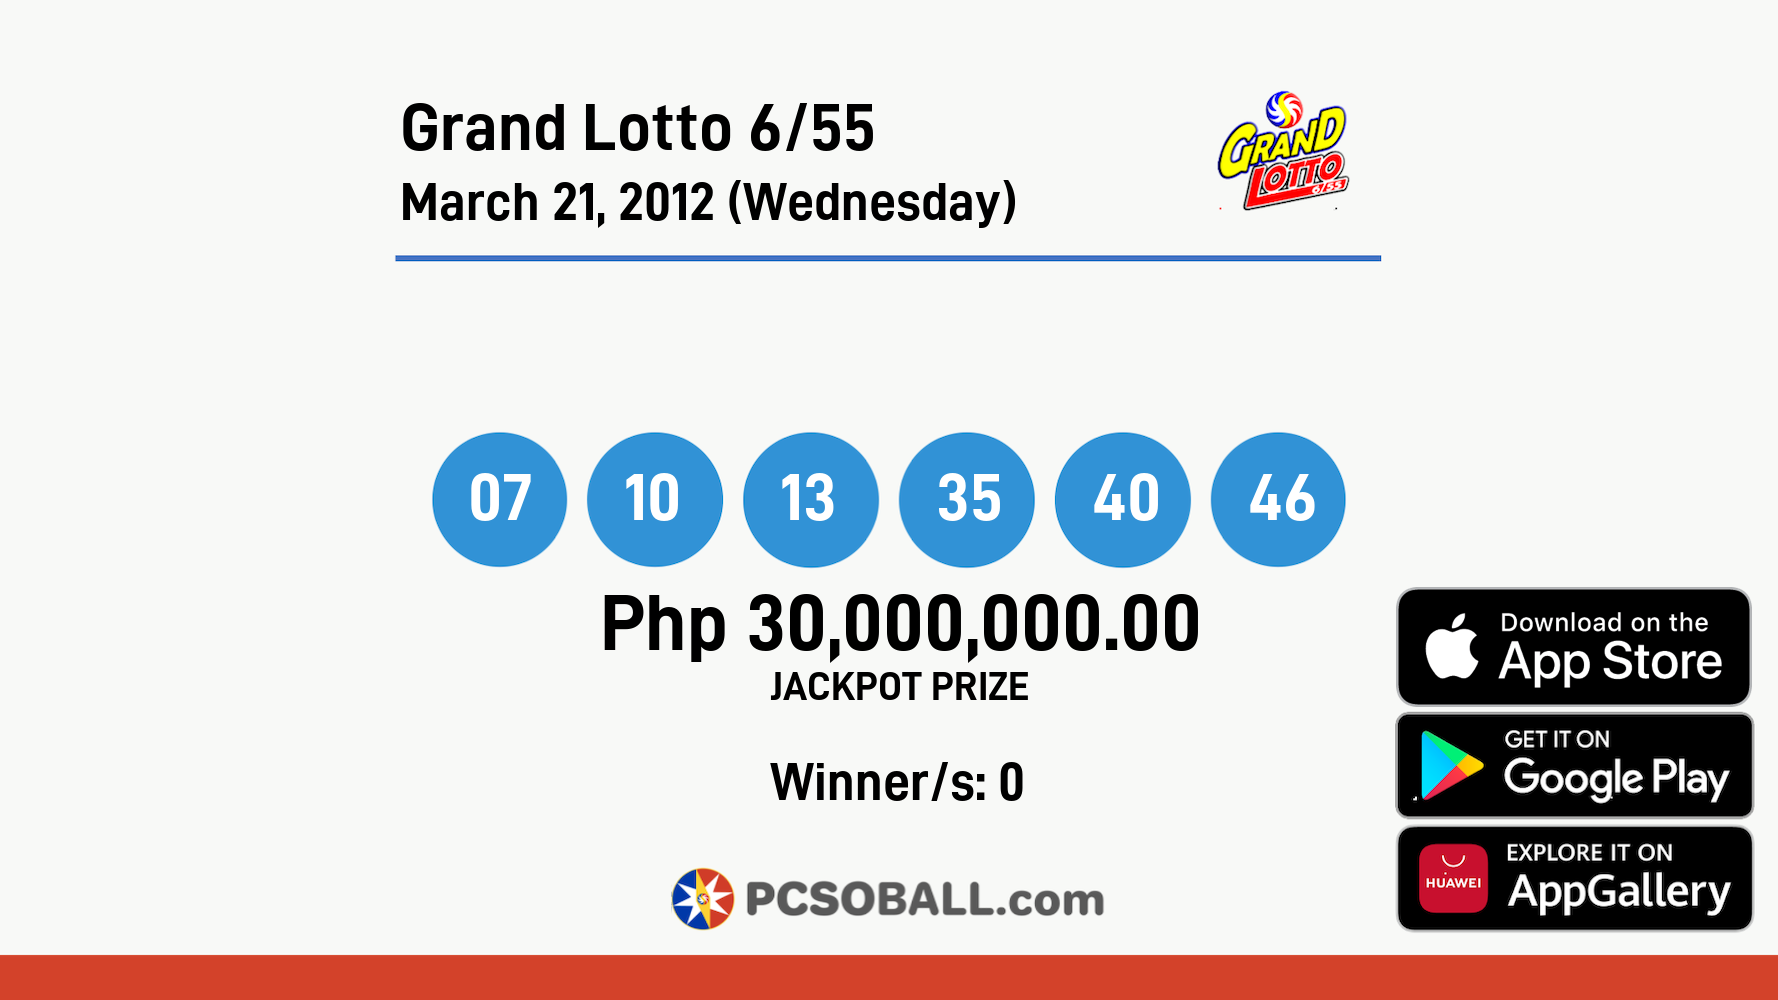 Grand Lotto 6/55 March 21, 2012 (Wednesday) Result